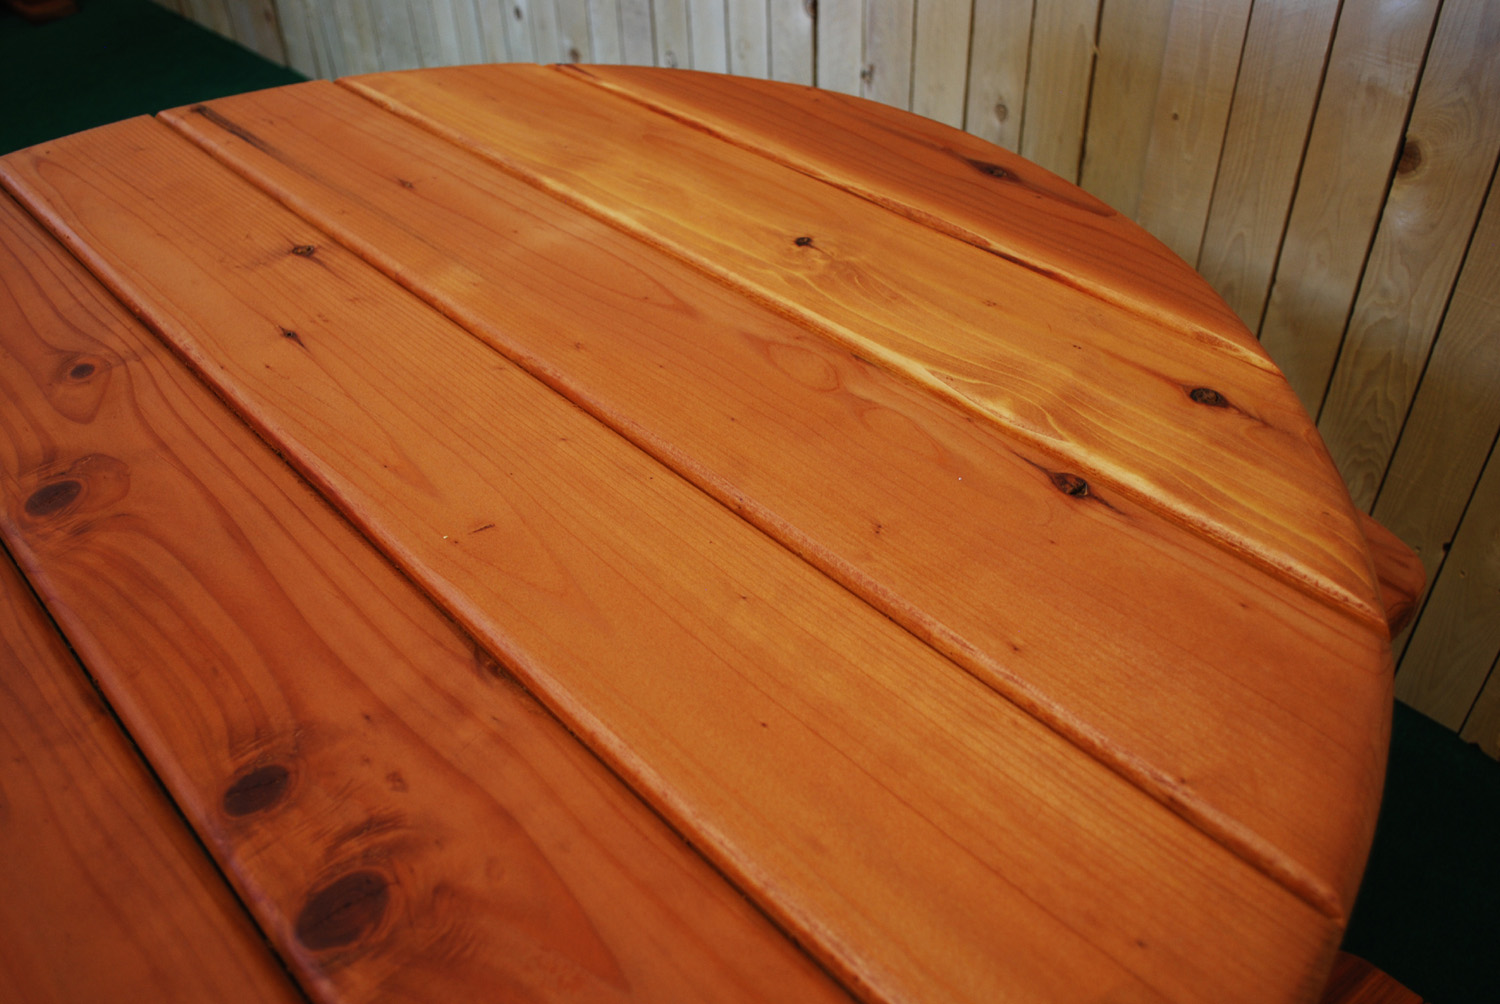 48" redwood round picnic table